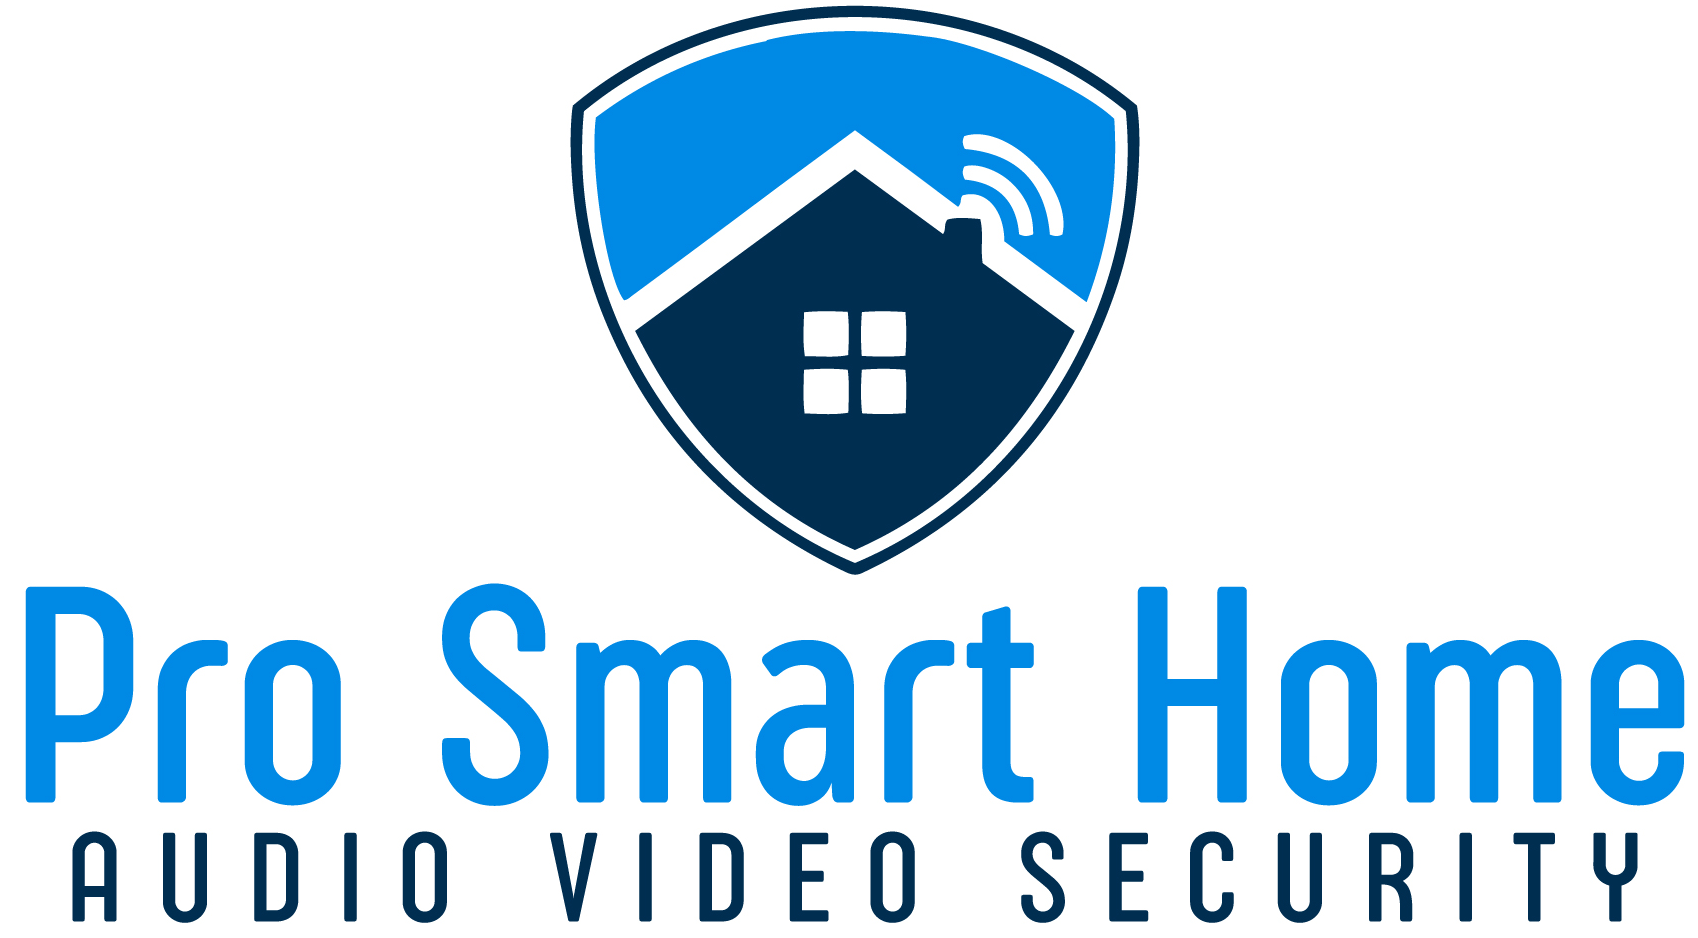 Pro Smart Home Solution-We provide all kinds of home automation from reputable companies